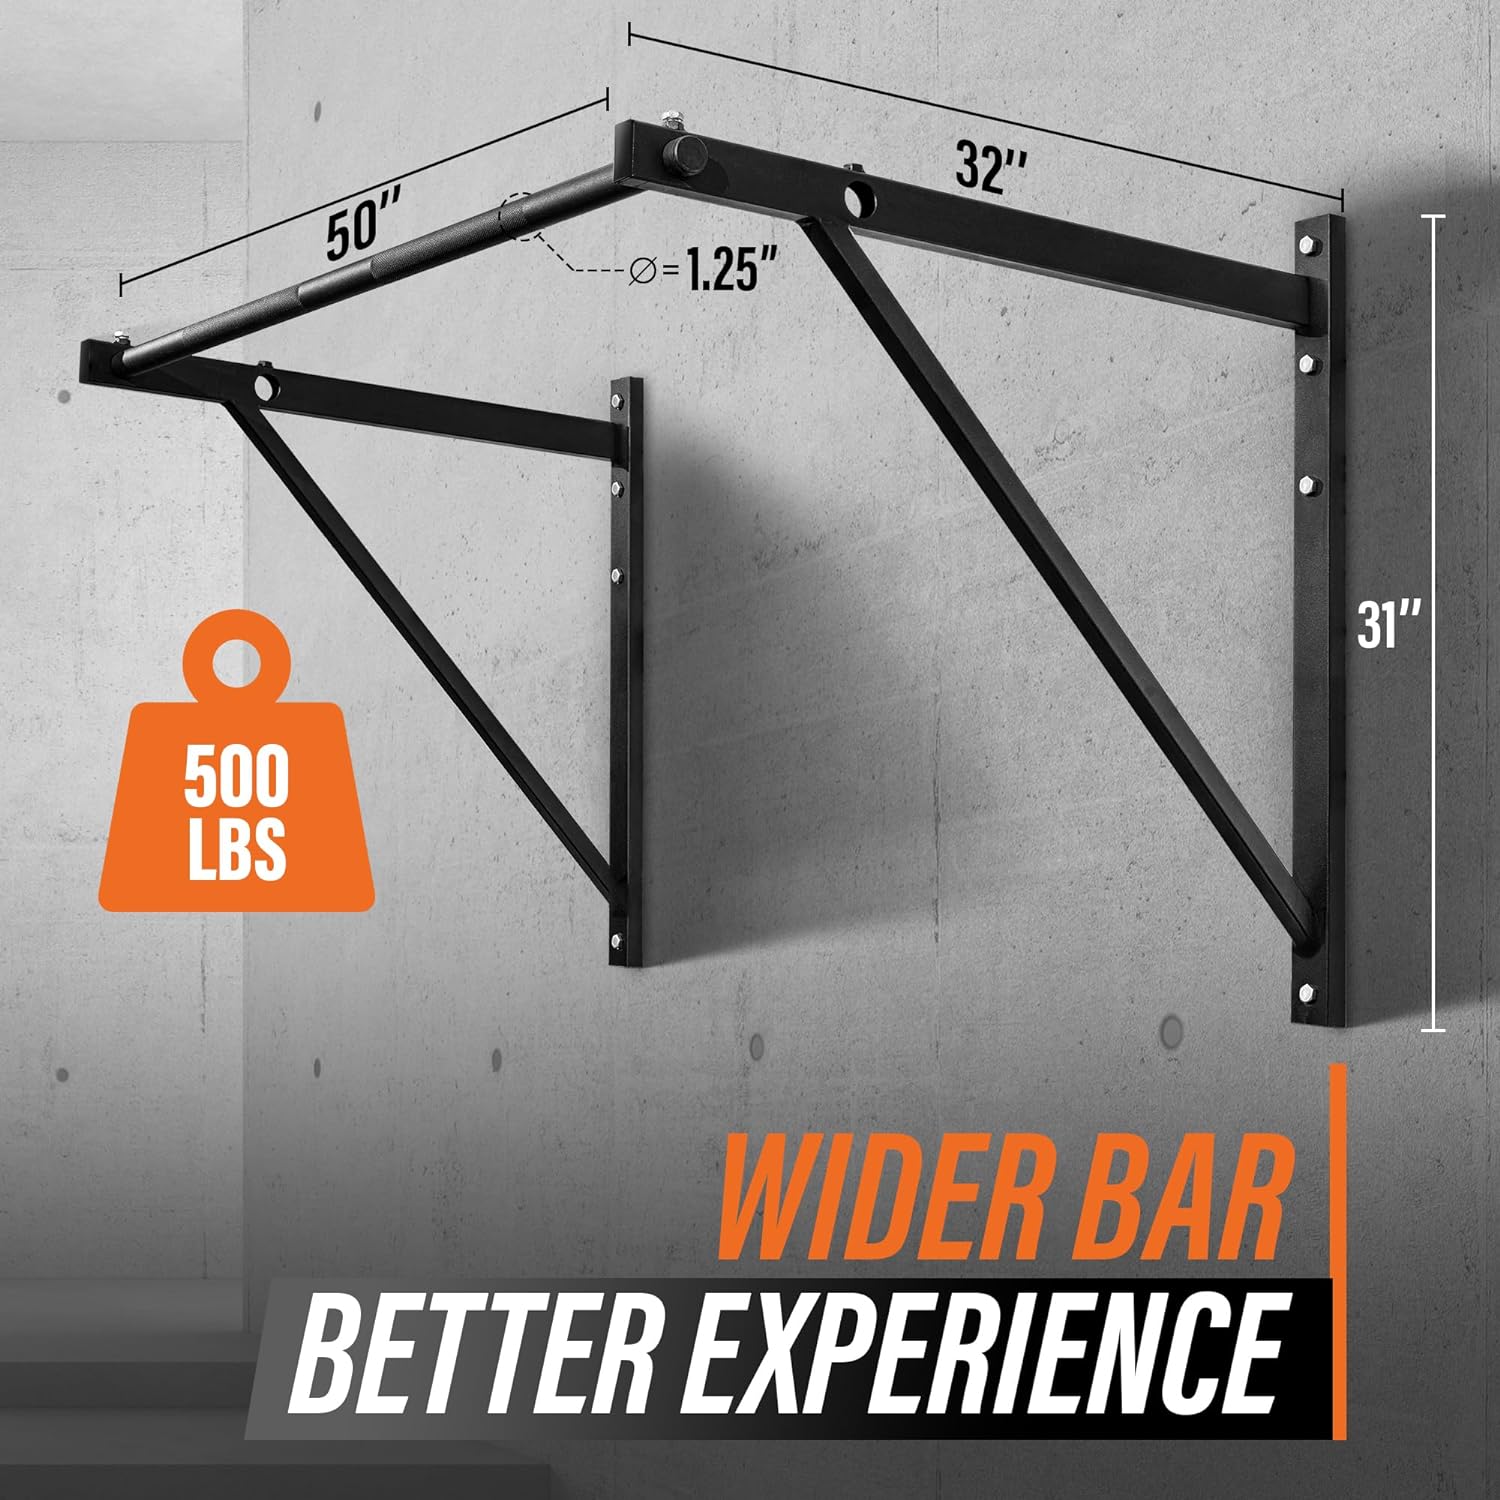 Yes4All Heavy Duty Wall Mounted Pull Up Bar \u2013 Multi-Grip Ceiling Strength\/ Joist Mount\/ Chin-Up Bar for Home Gym Portable